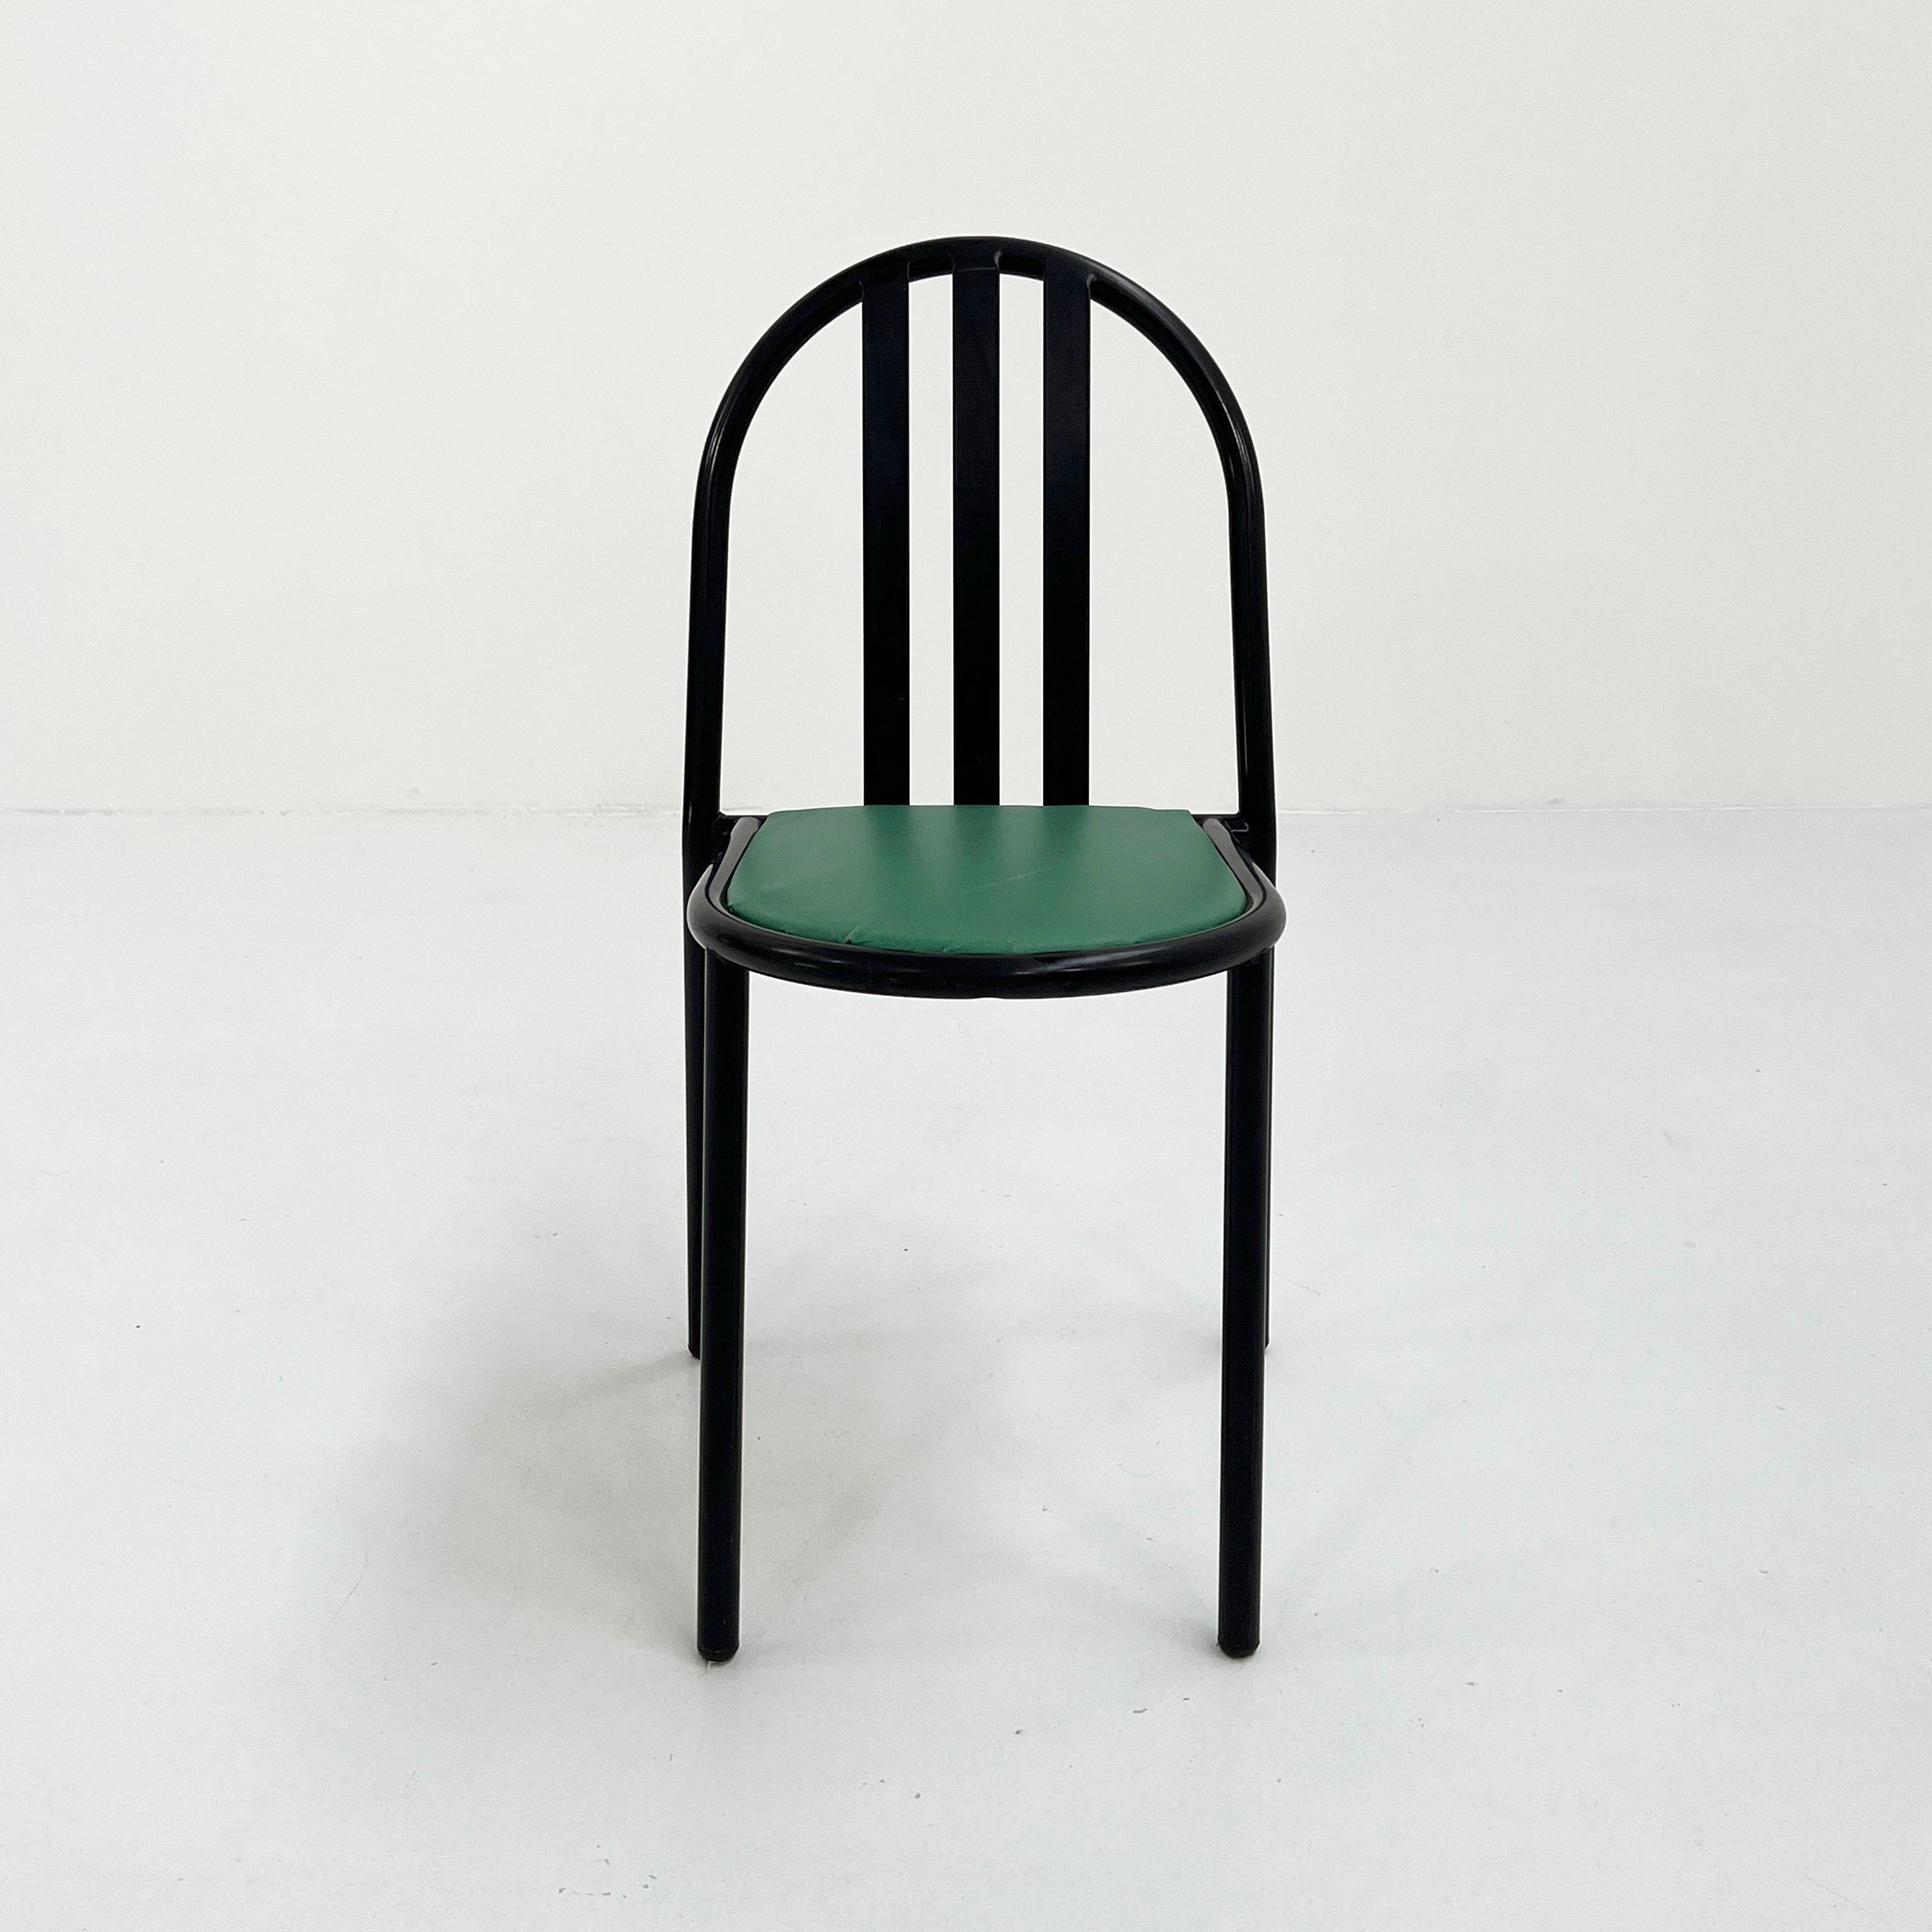 Italian No.222 Chair with Green Seat by Robert Mallet-Stevens for Pallucco Italia, 1980s